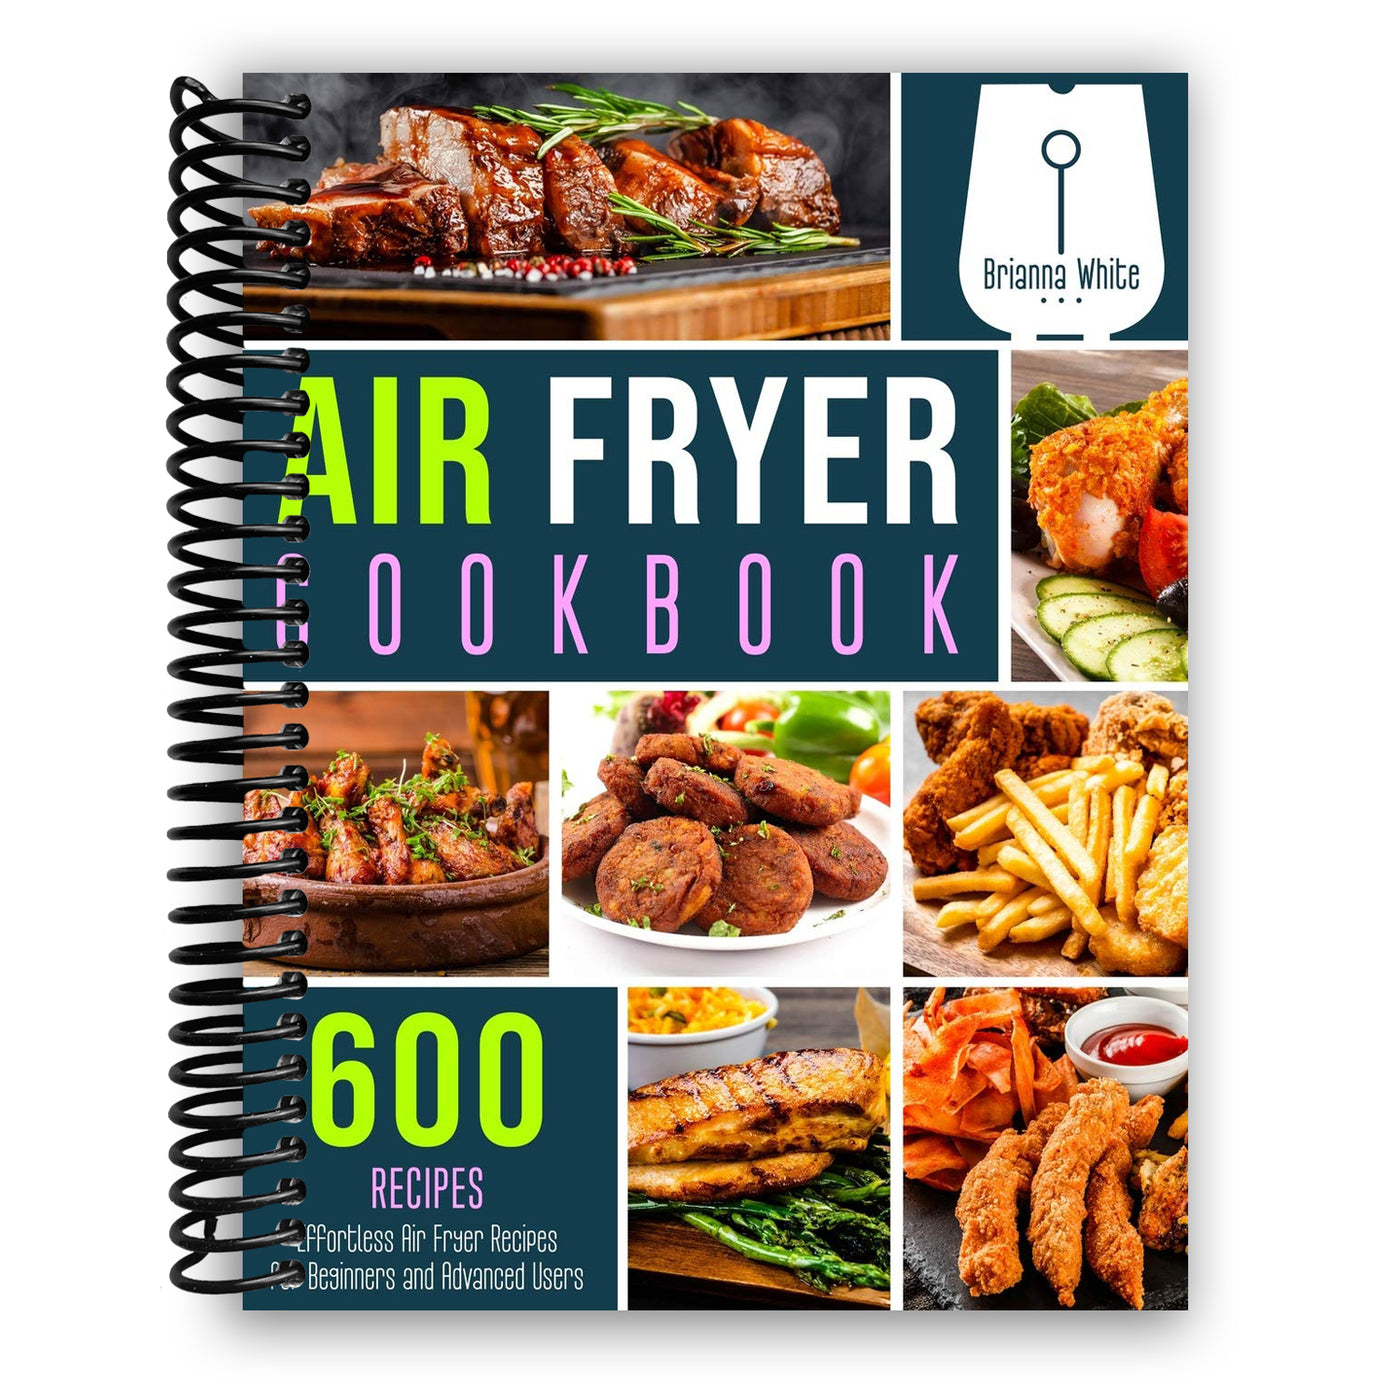 The Essential Elite Gourmet Air Fryer Cookbook: 200 Quick Air Fryer Recipes That Will Make Your Life Easier [Book]